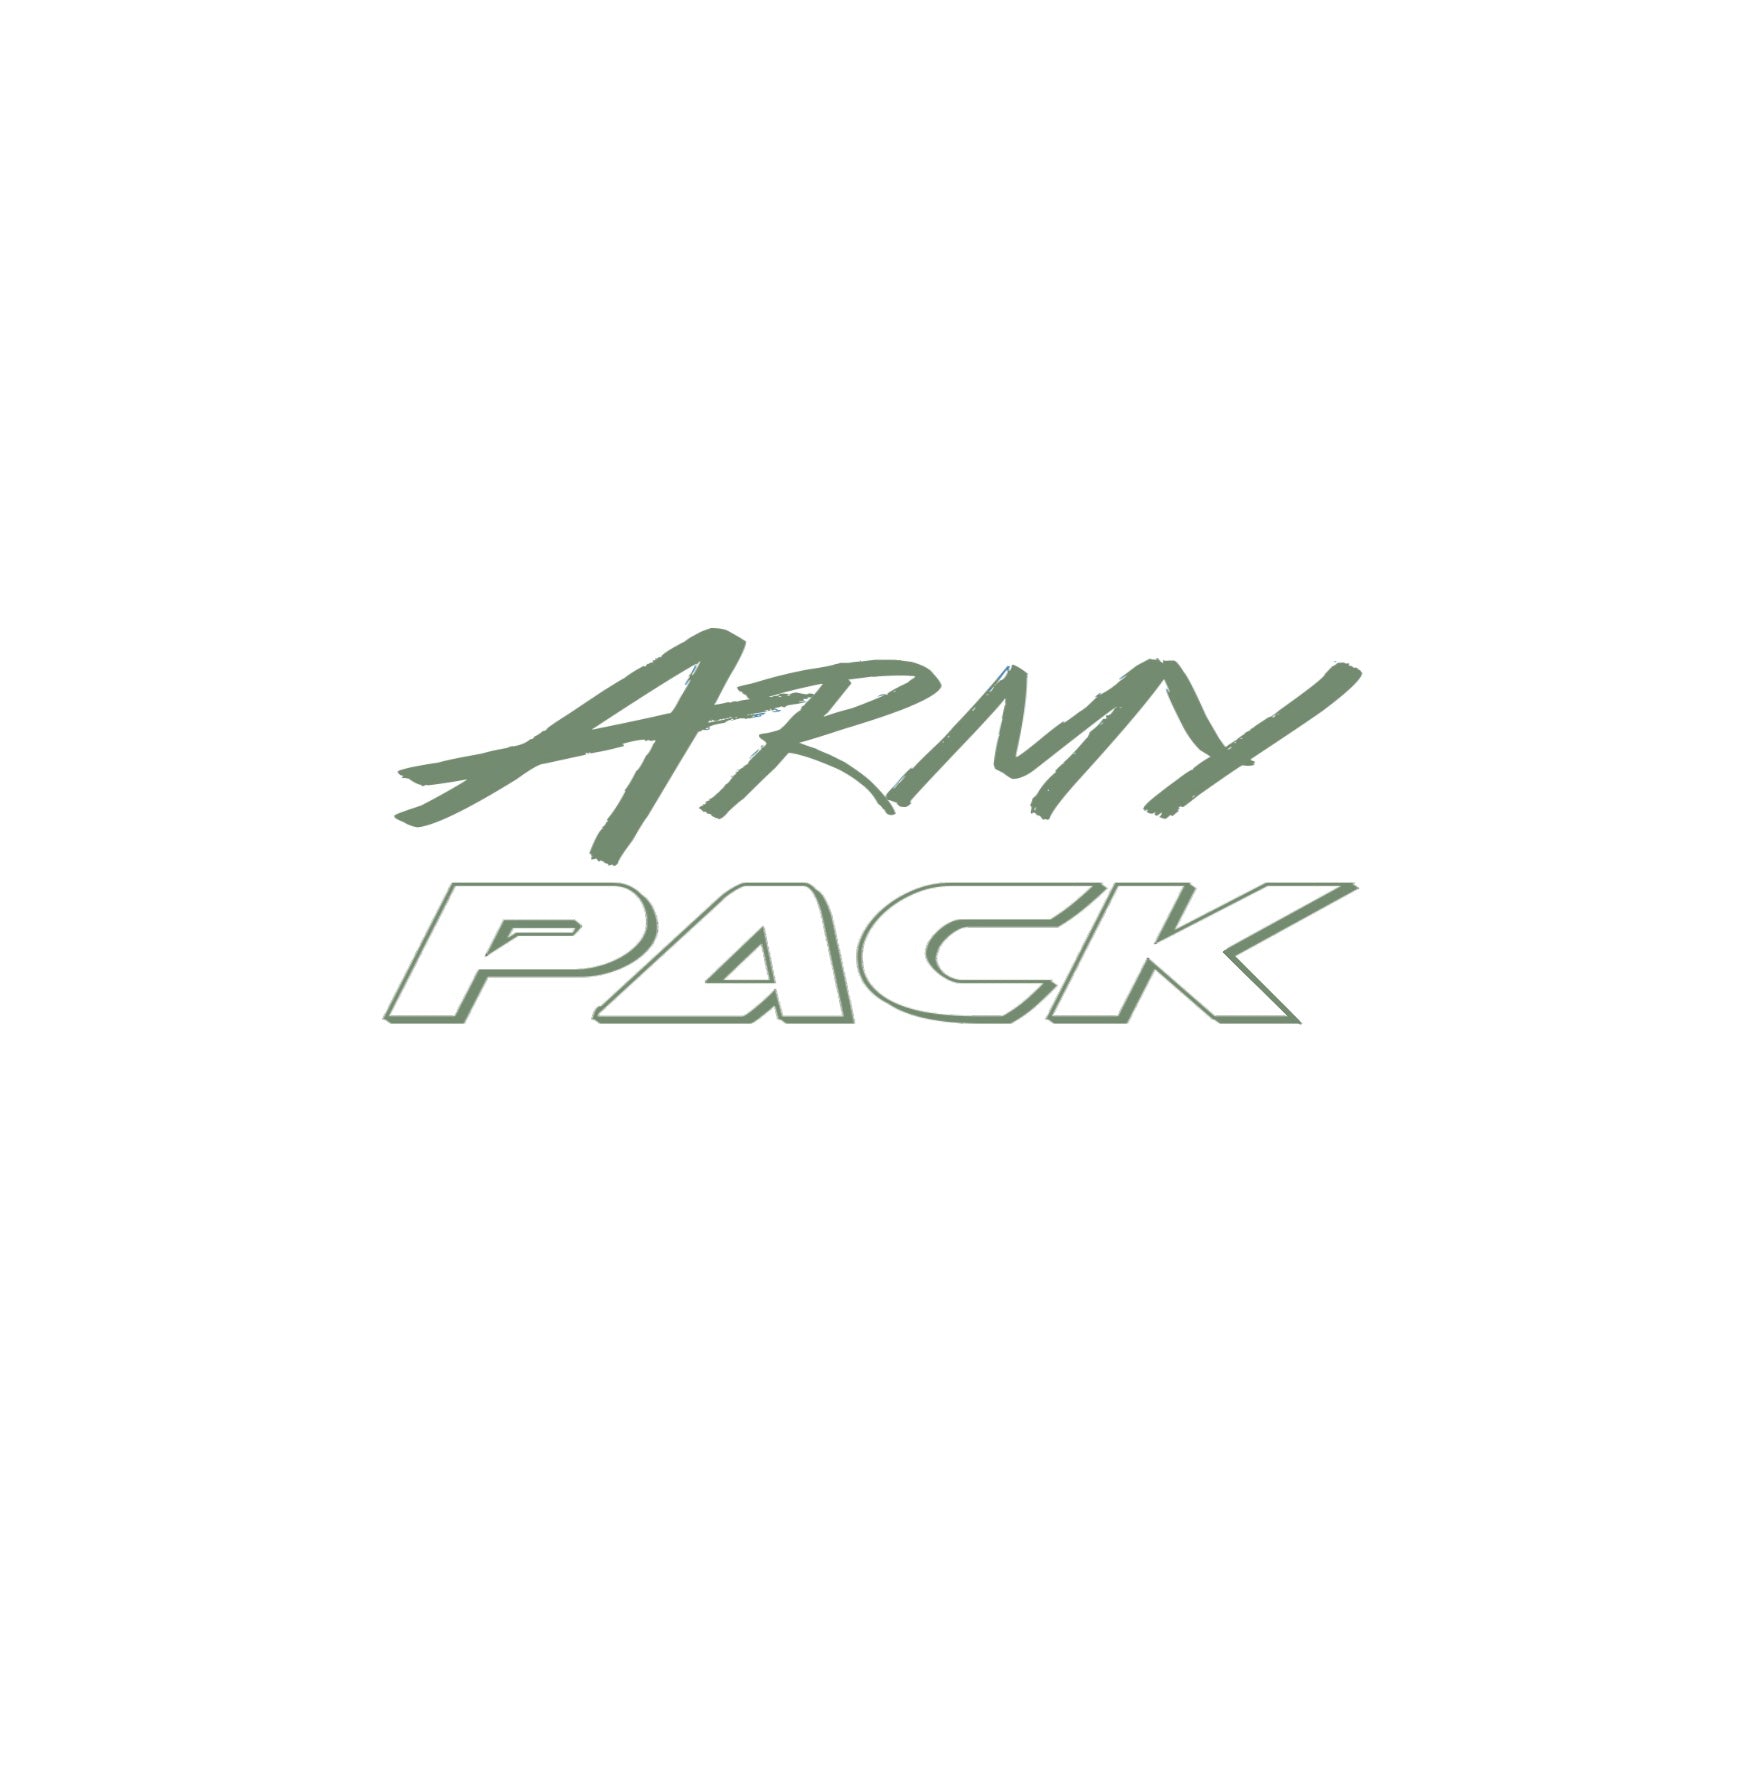 Army Lifter Pack